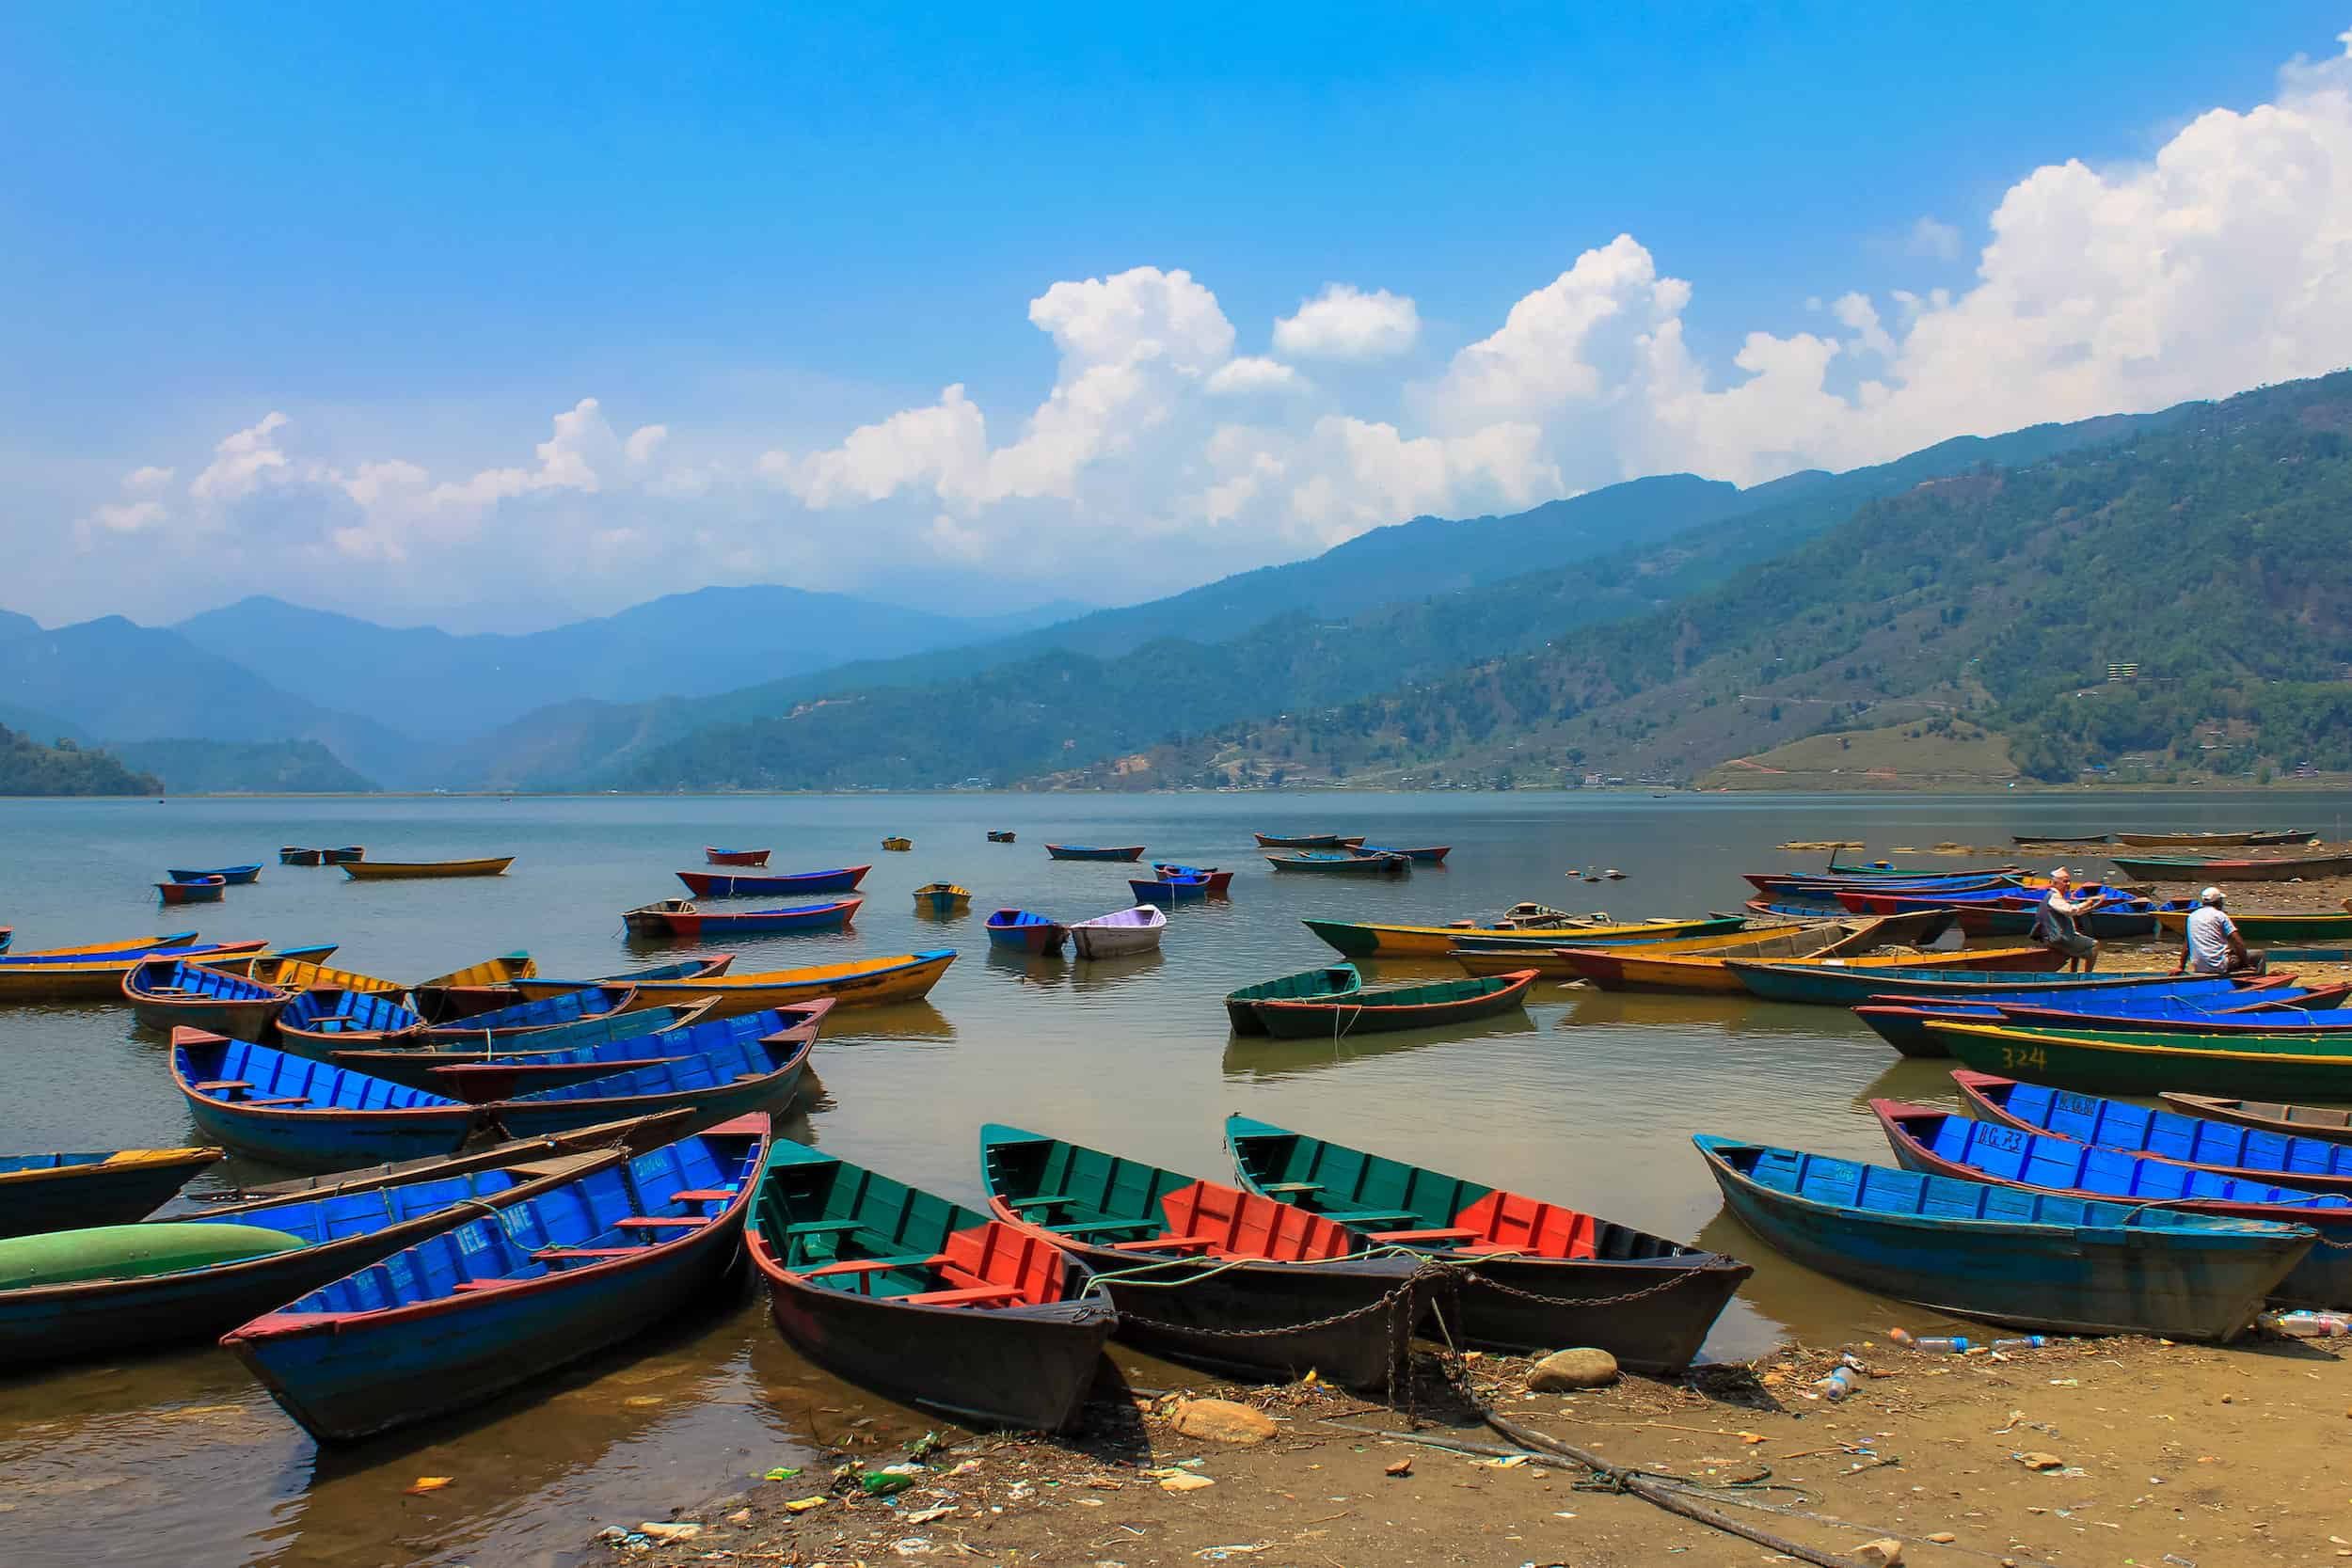 Colorful wooden row boats in edge of lake